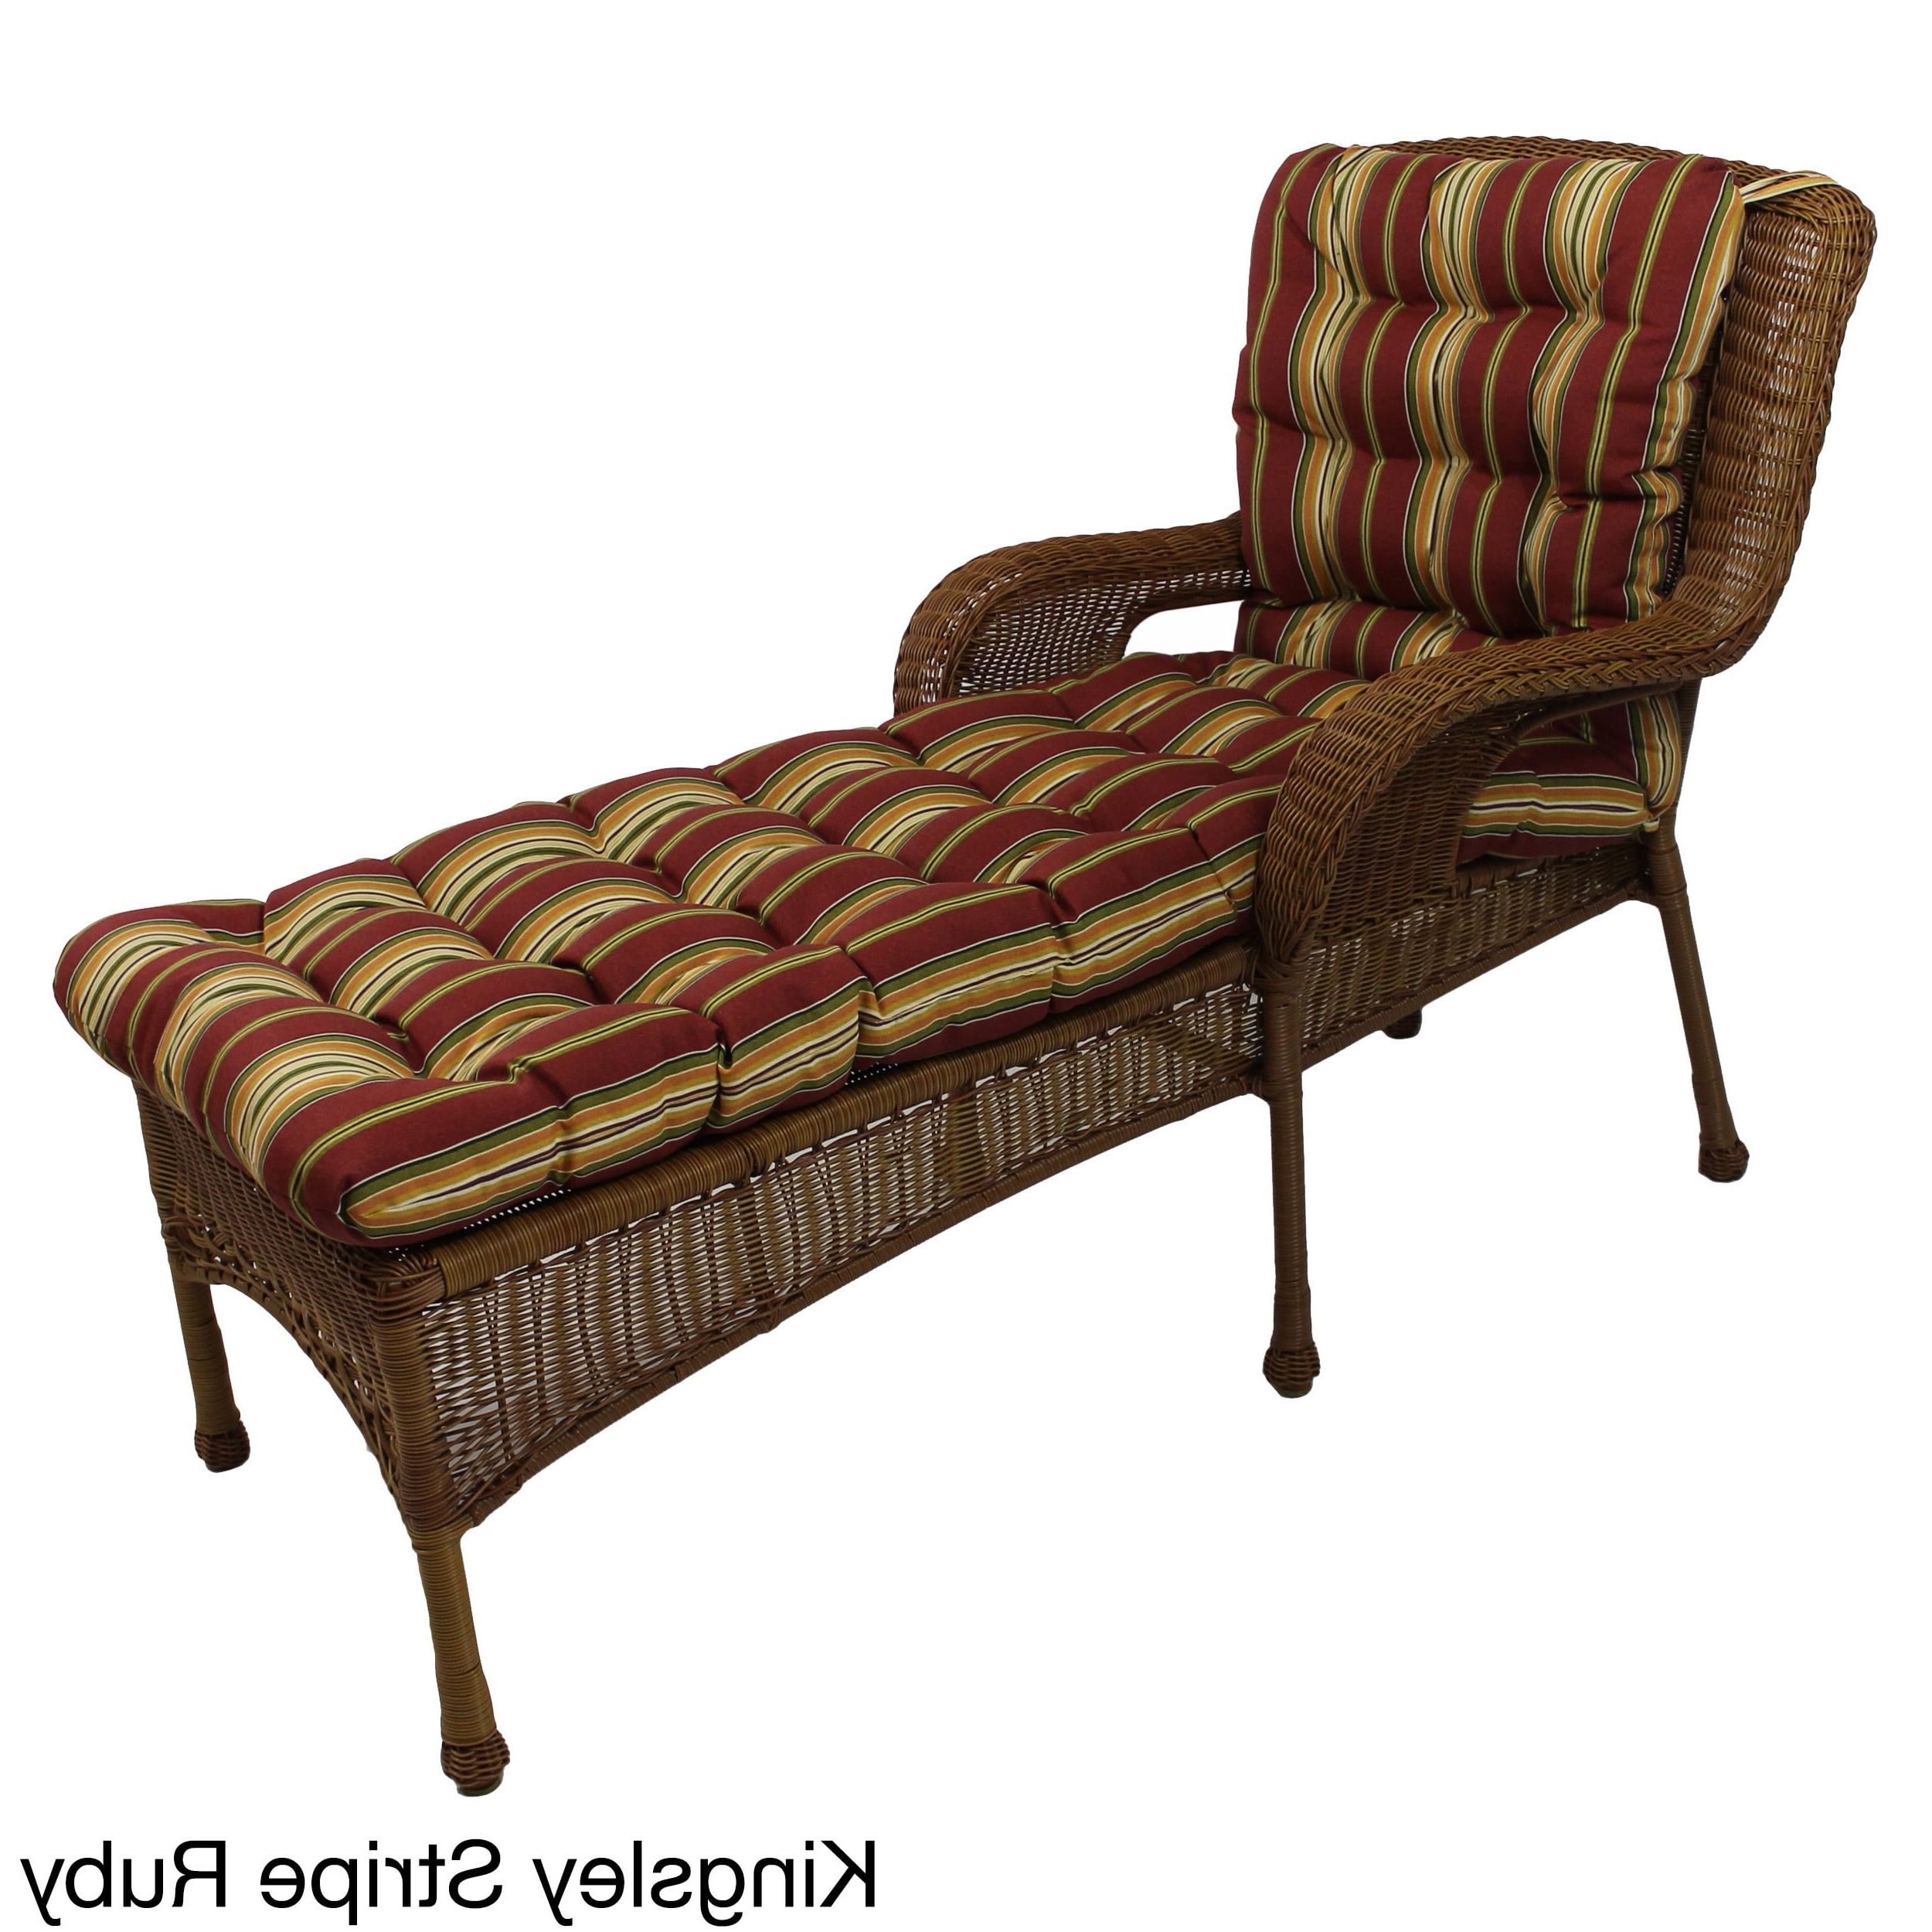 Newest Wooden Chaise Lounges Regarding All Weather Outdoor Chaise Lounge Cushion – Free Shipping Today (View 15 of 15)